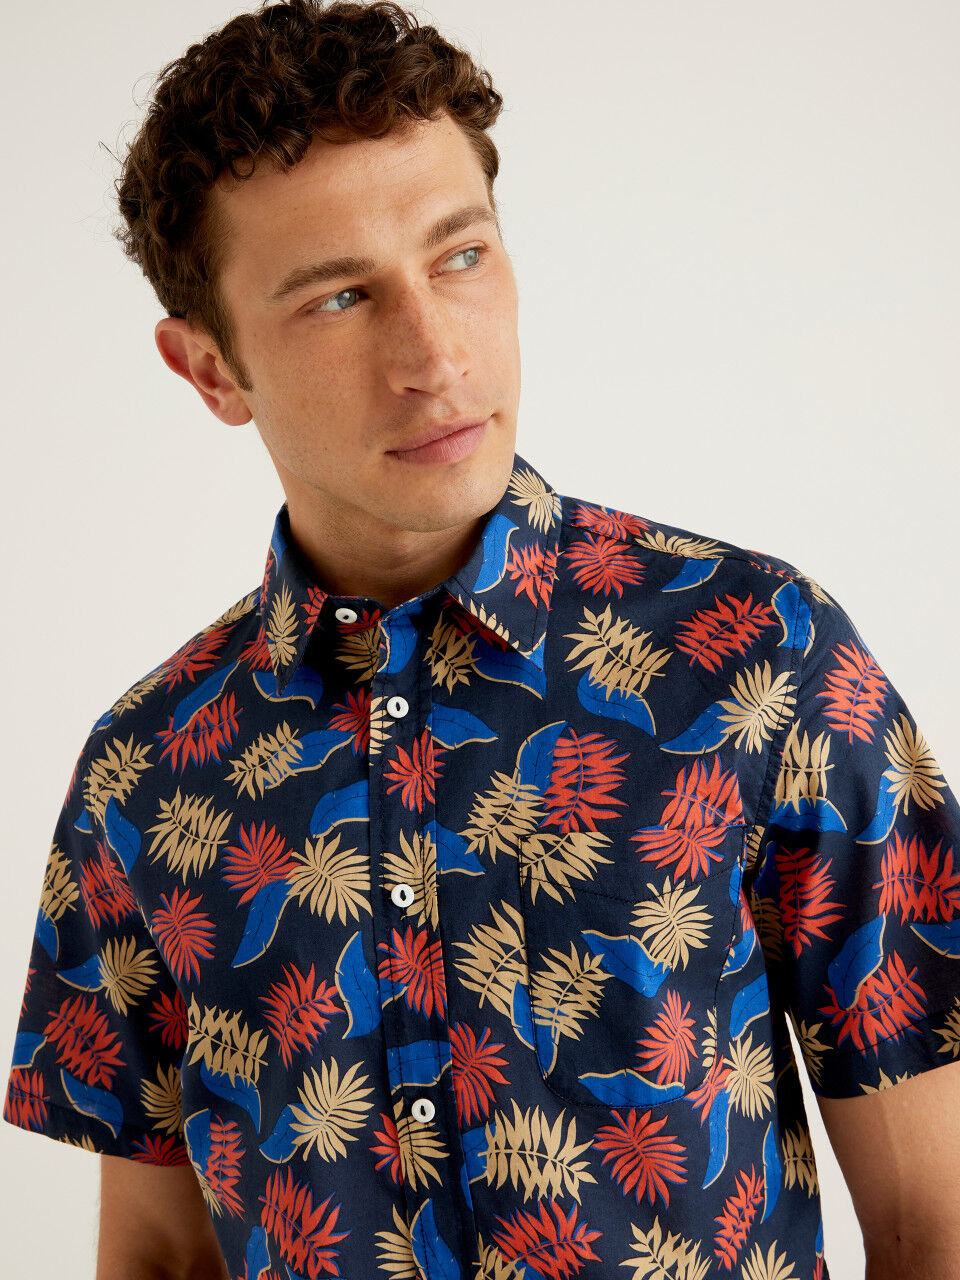 Best Trends for Men’s Shirts 2023 - The Urban Crews